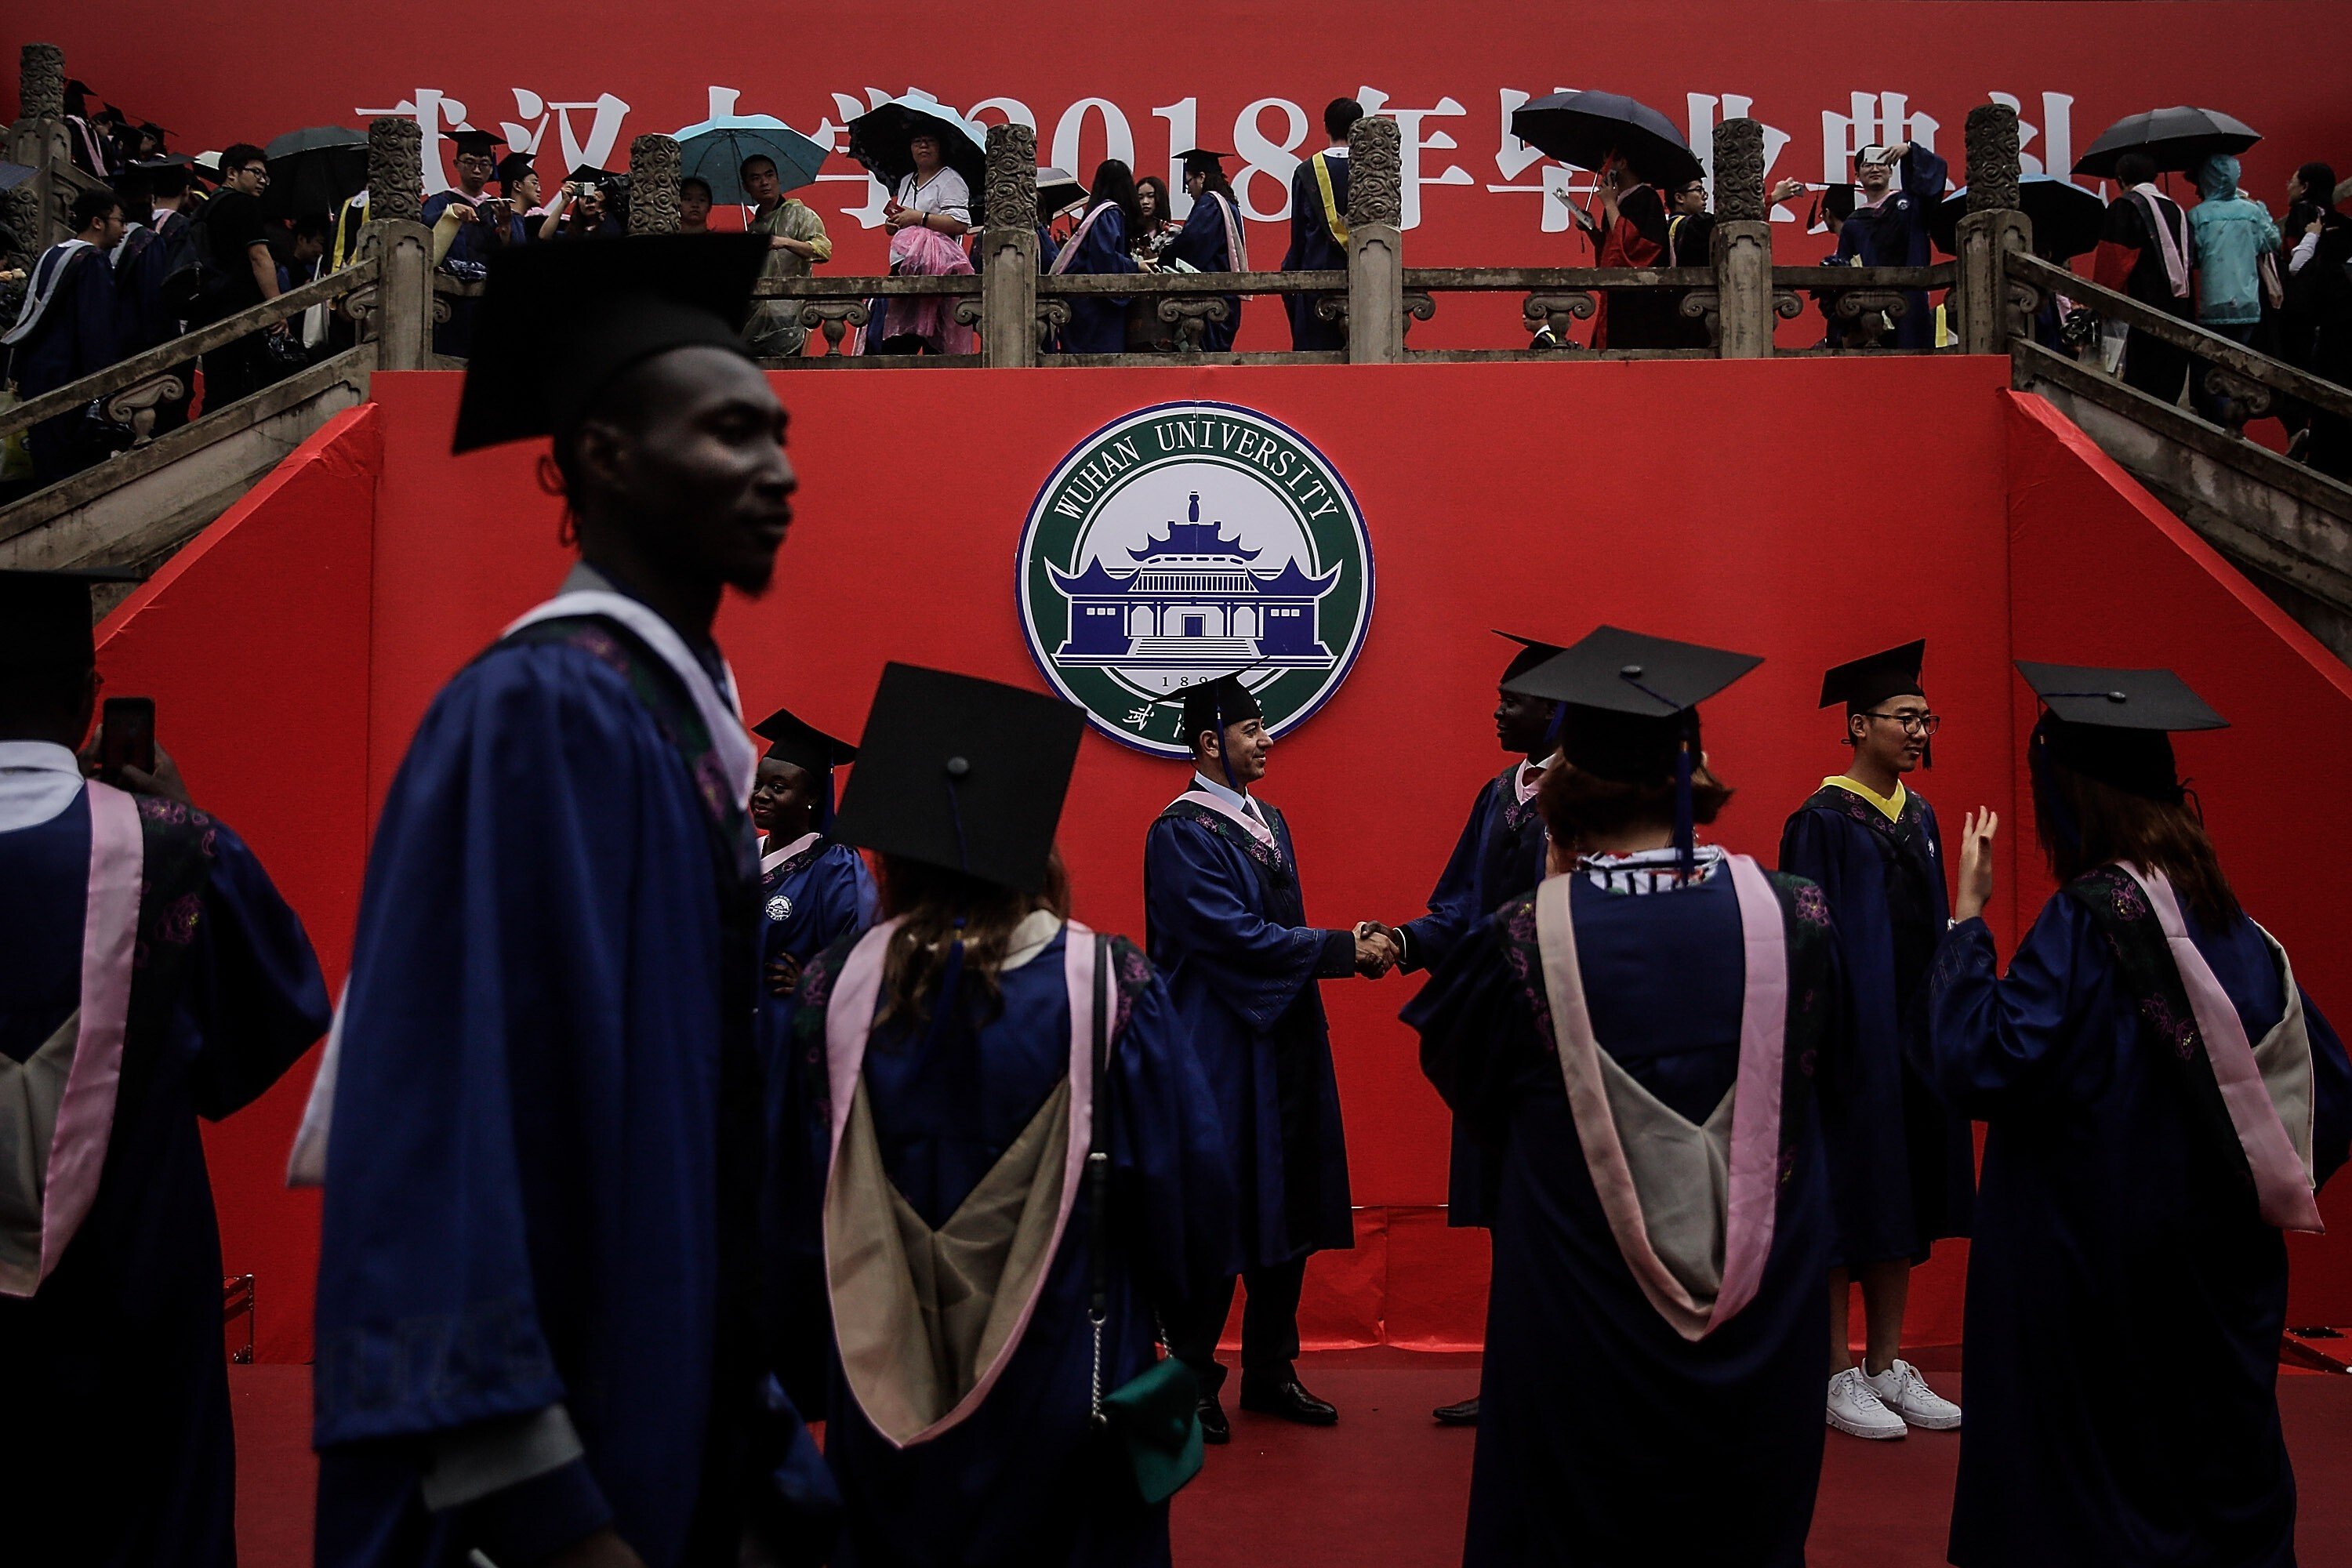 Many foreign students in China come from Africa or the subcontinent. Photo: Getty Images